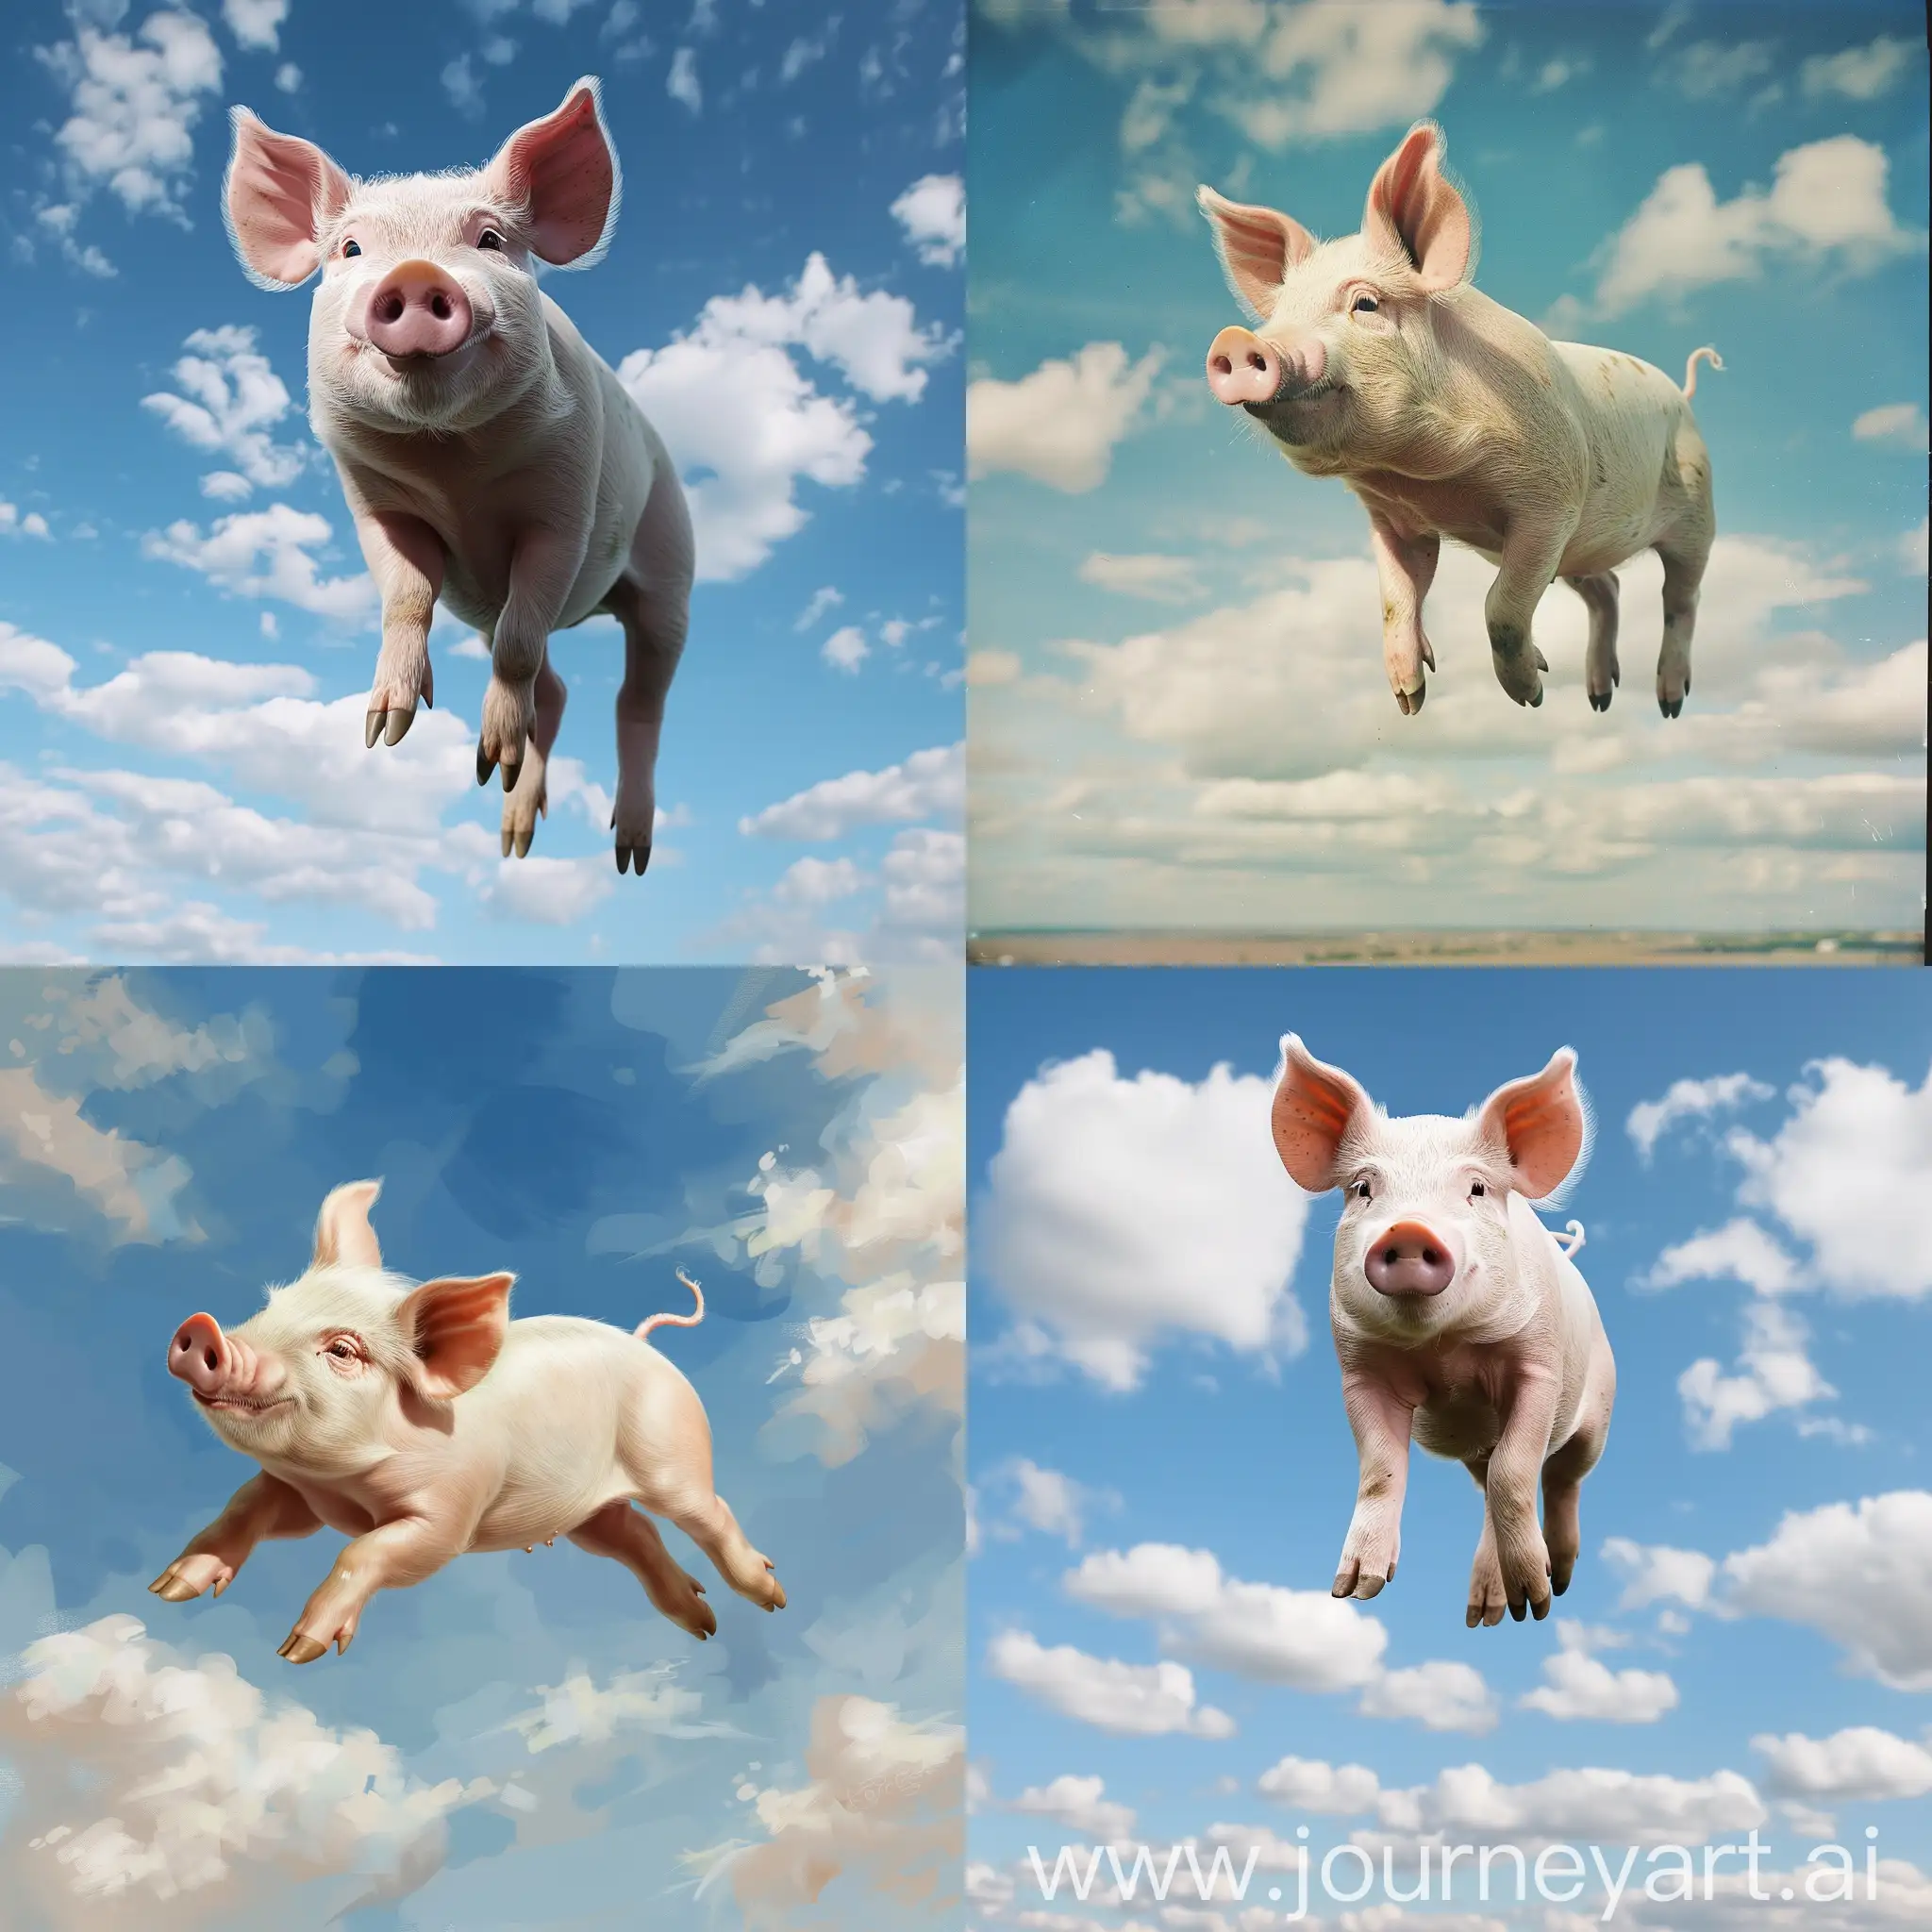 Flying-Pig-in-Fantasy-Sky-Vibrant-and-Rare-Sighting